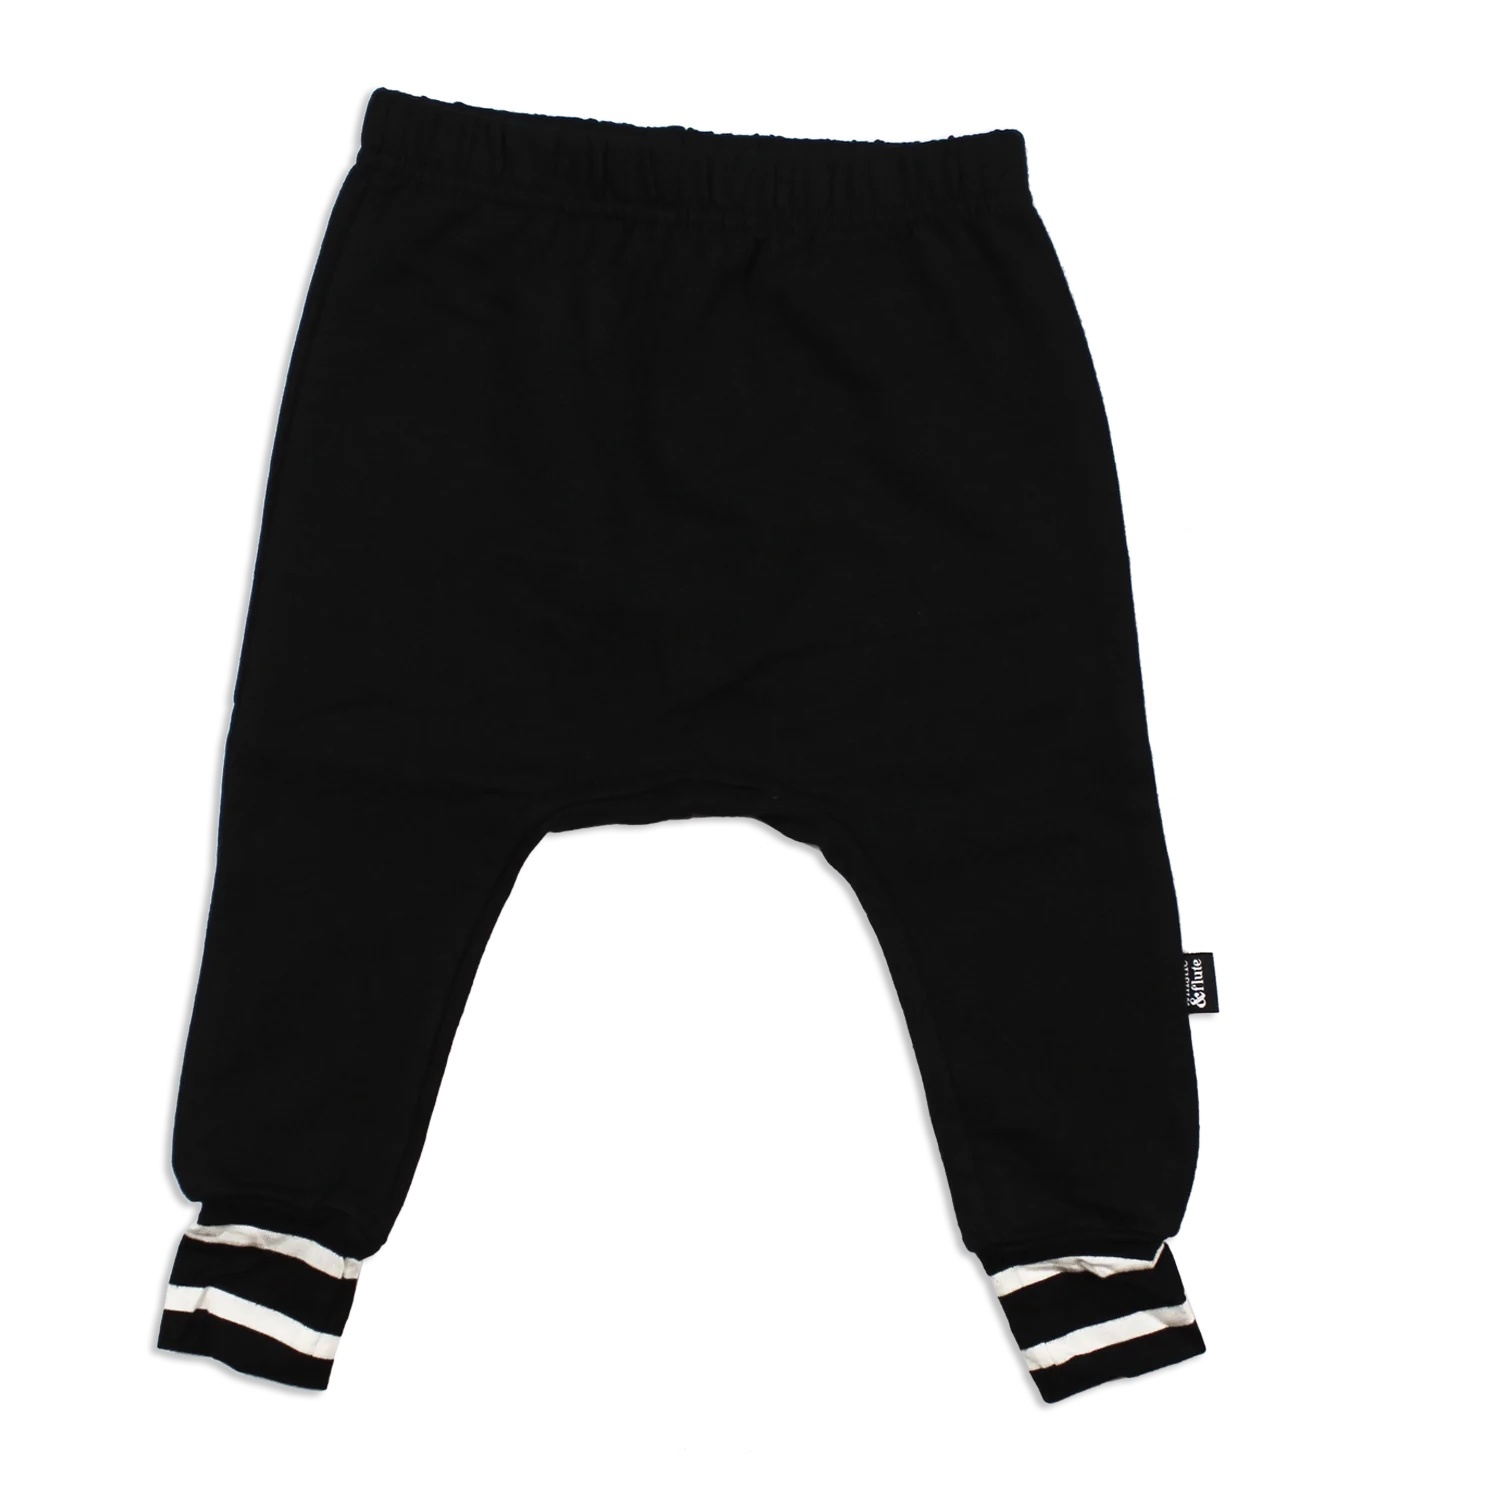 Whistle & Flute Whistle & Flute Bamboo Joggers